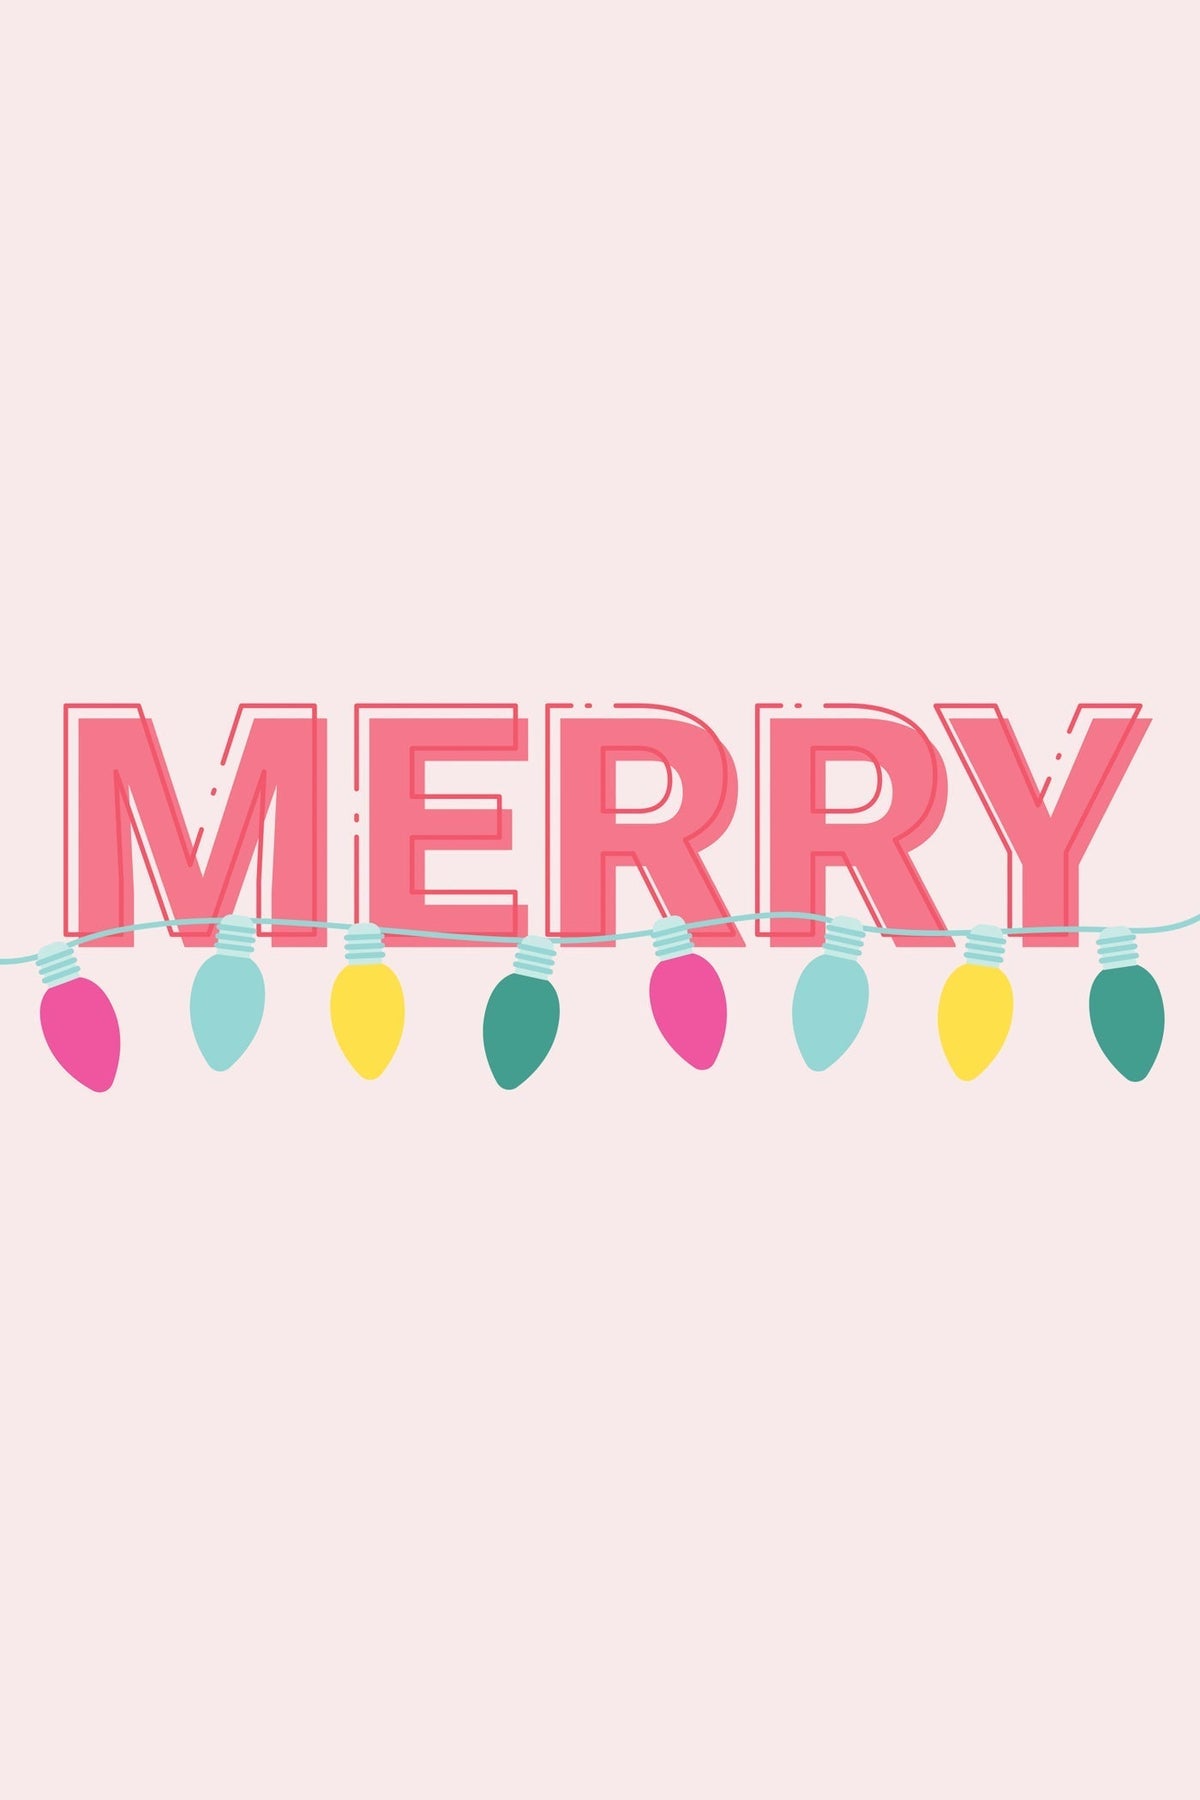 FREEBIE - Holiday Graphics - Holiday Cards - Merry